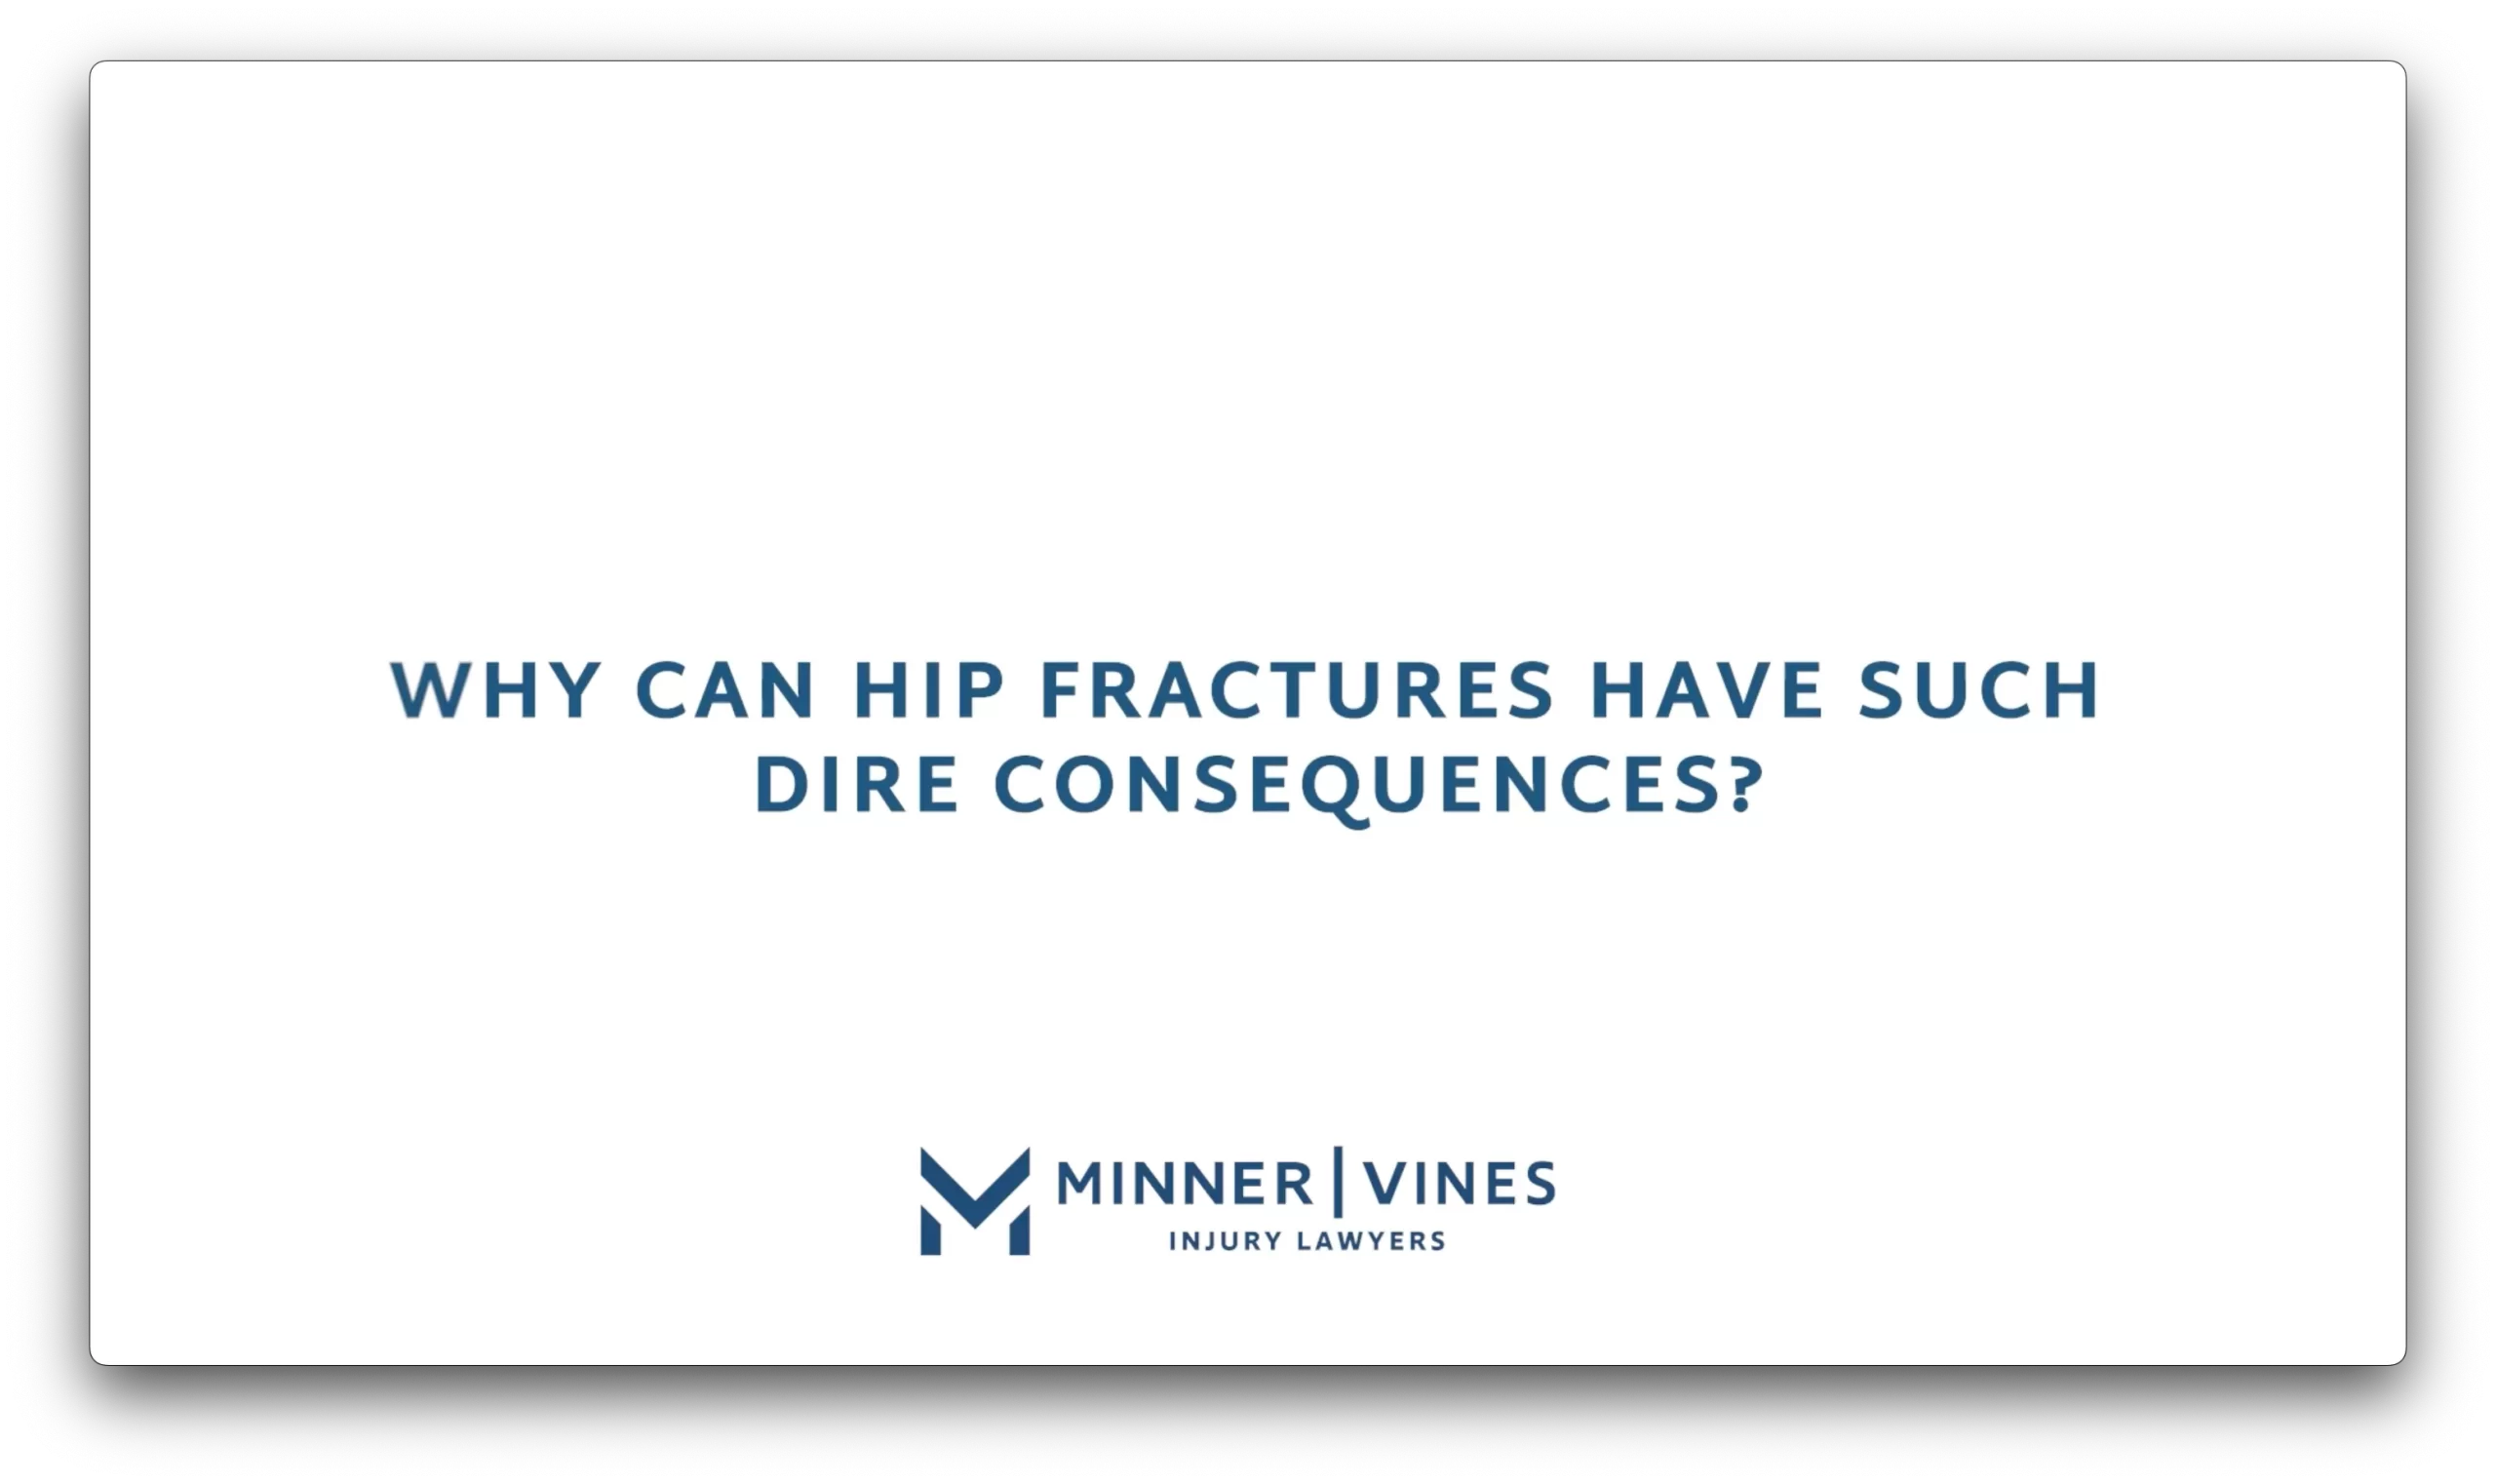 Why can hip fractures have such dire consequences?